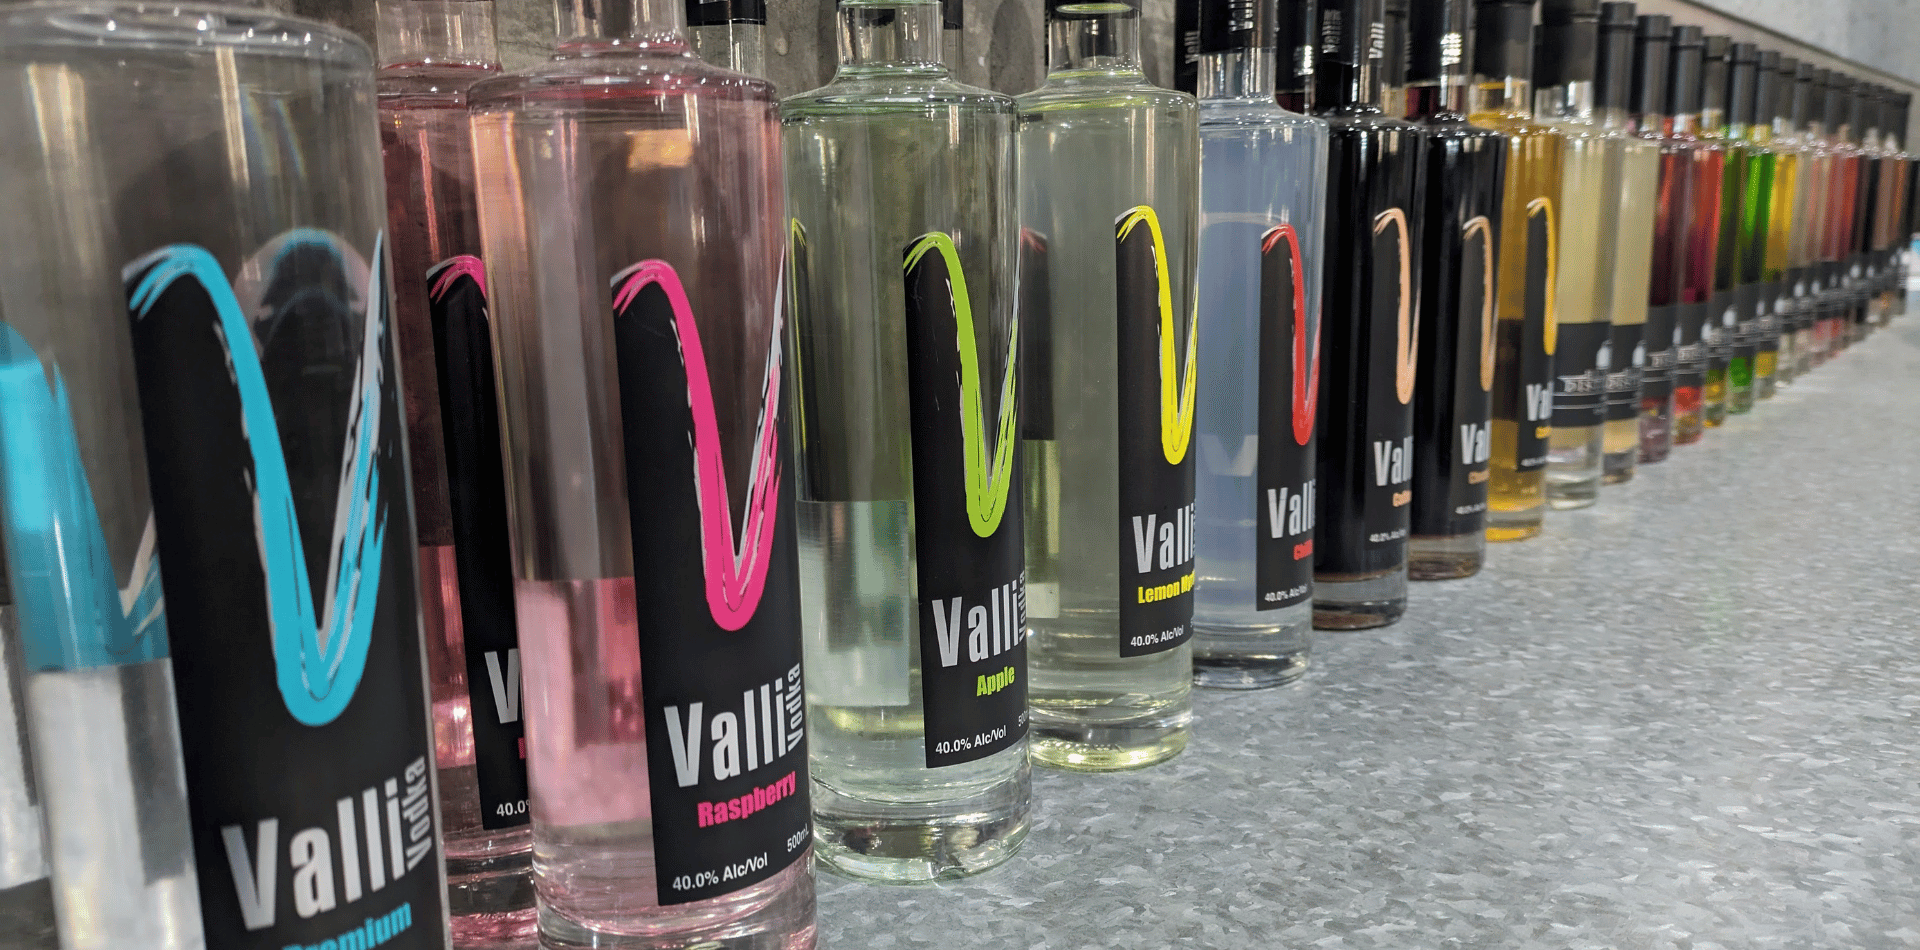 Bottles of Valli Vodka lines up in a row